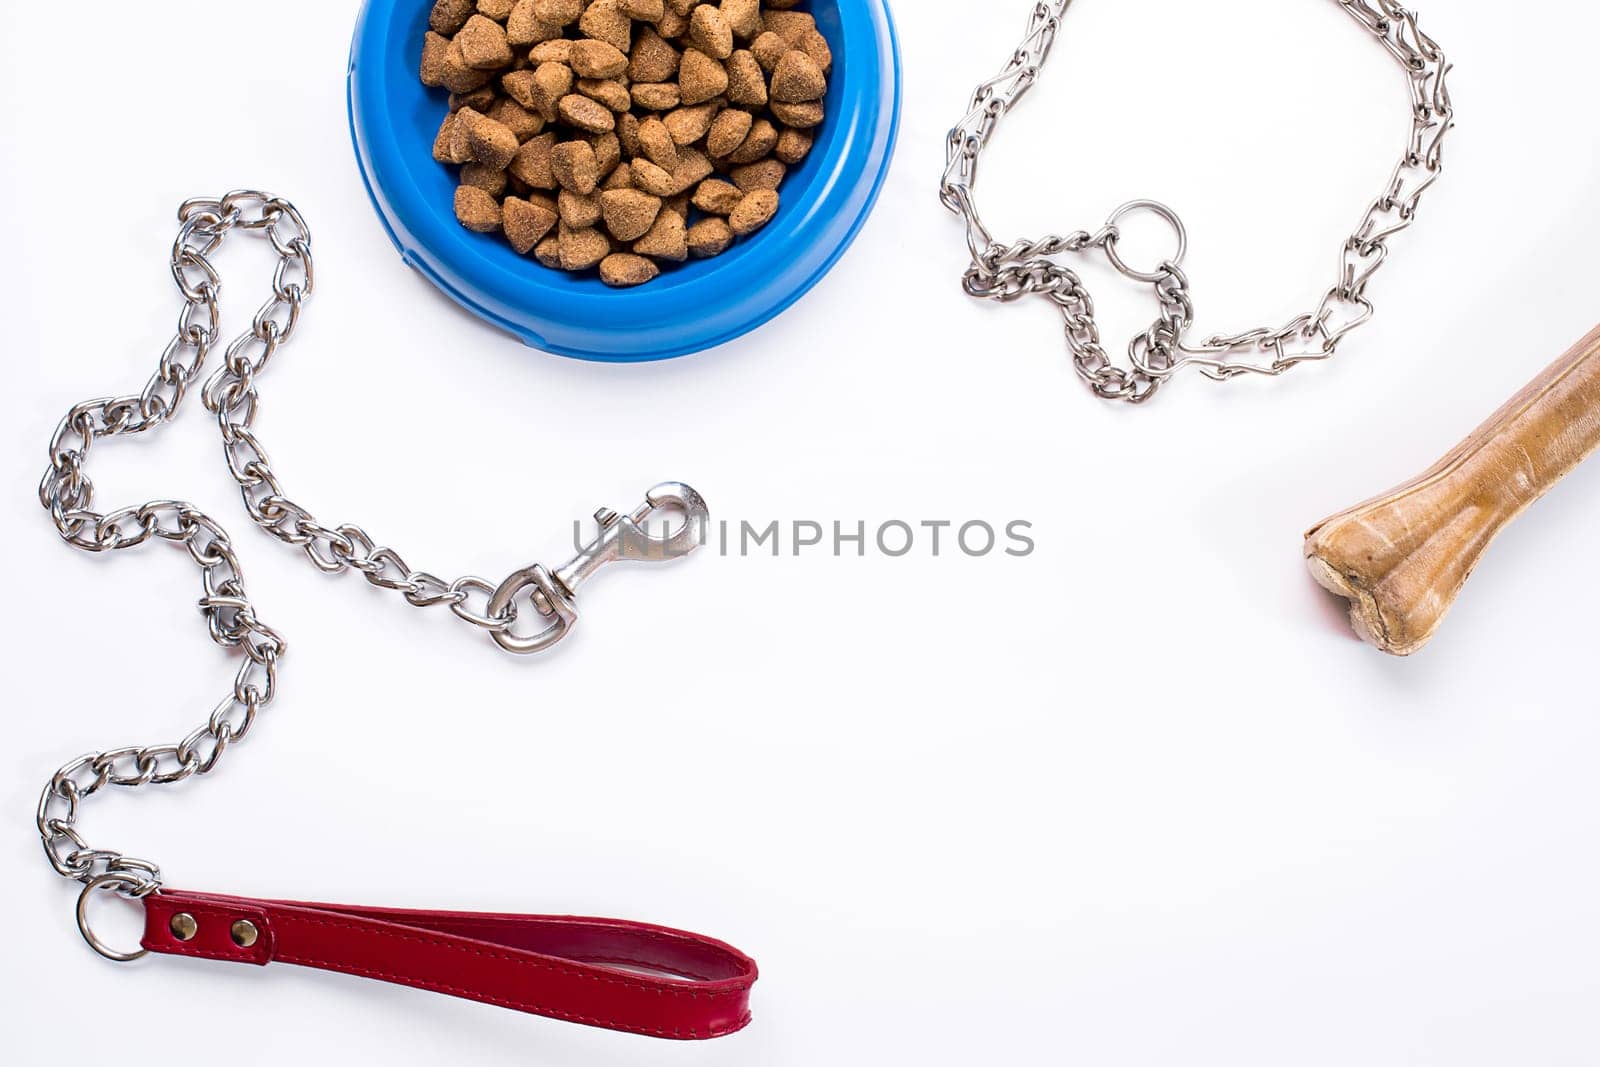 Collar, blue bowl with feed, leash and delicacy for dogs. Isolated on white background by nazarovsergey